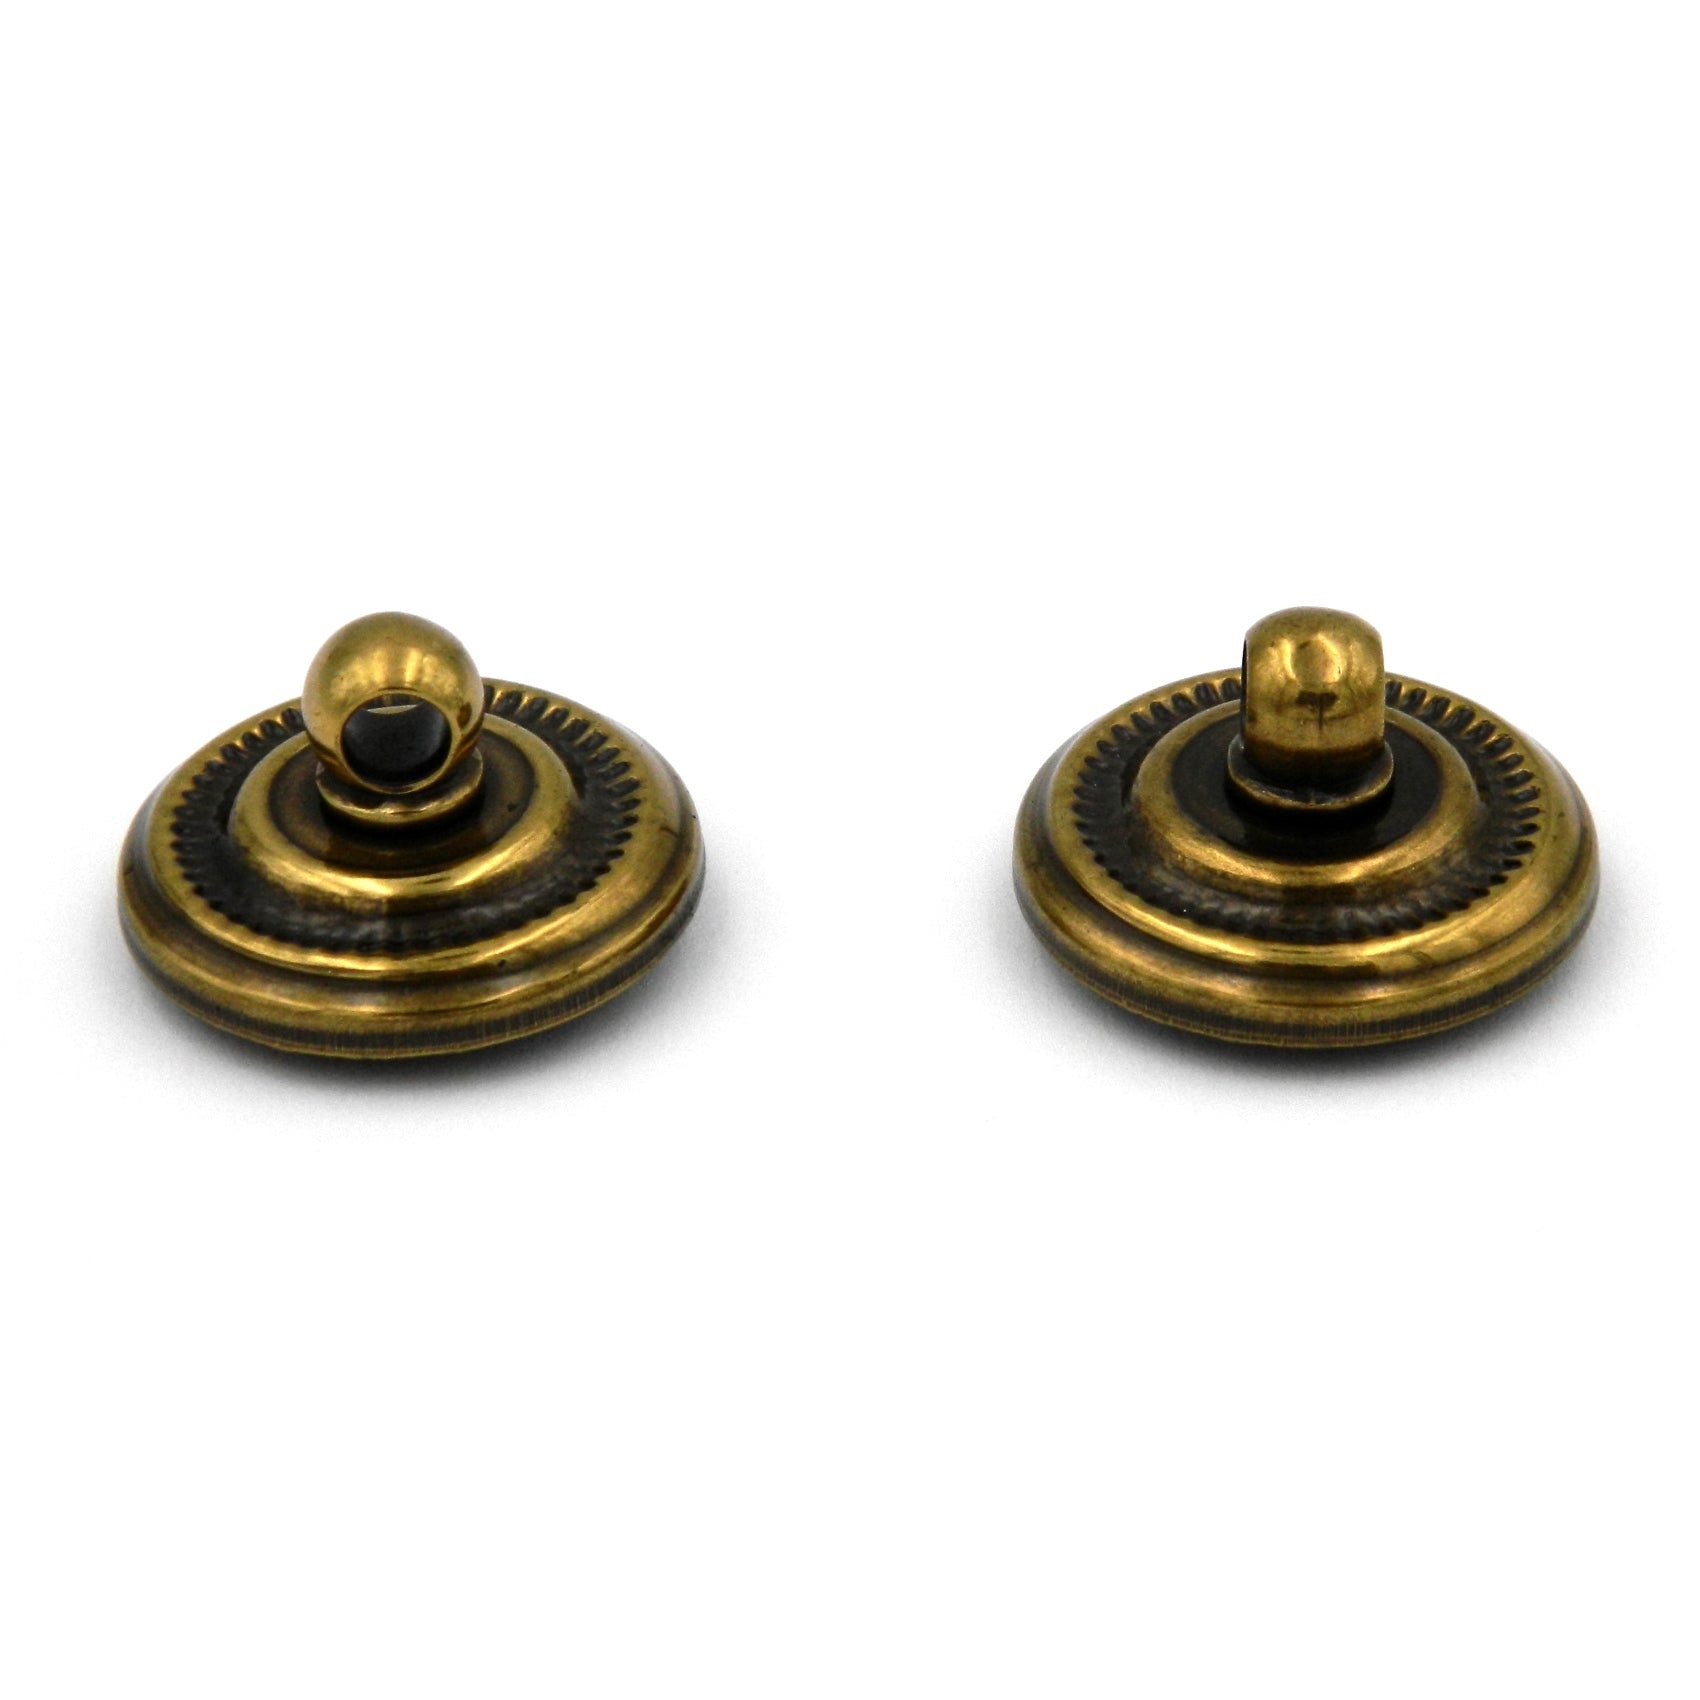 Pair of Belwith Antique Brass Replacement Rosettes For Bail, Swing, Drop Pulls